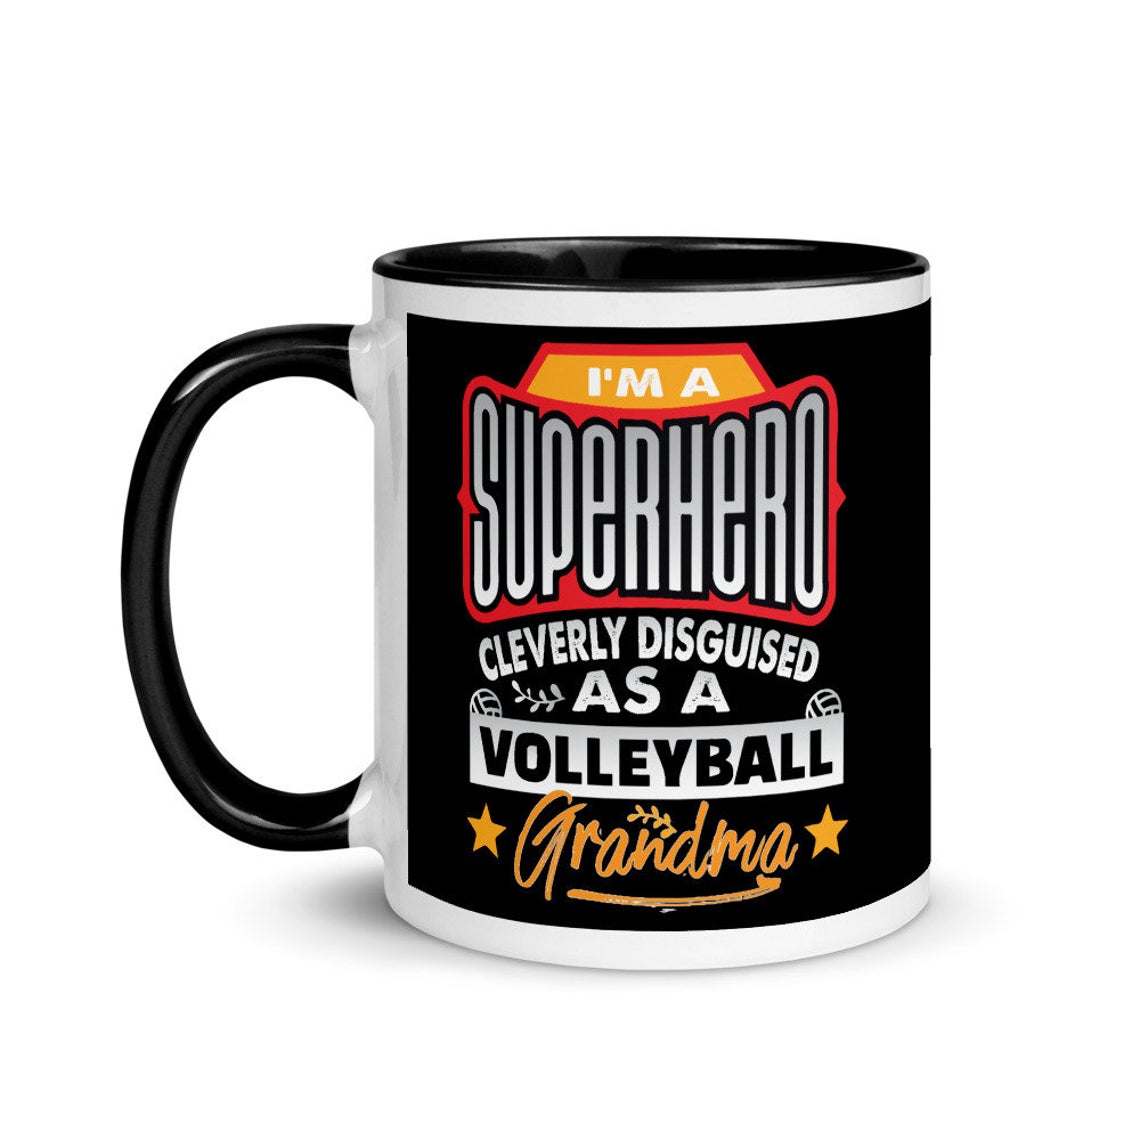 My Volleybragswag volleyabll mug collection includes mugs for hitters, liberos, blockers and coaches as well as the VBS Beast Collection featuring animal players.